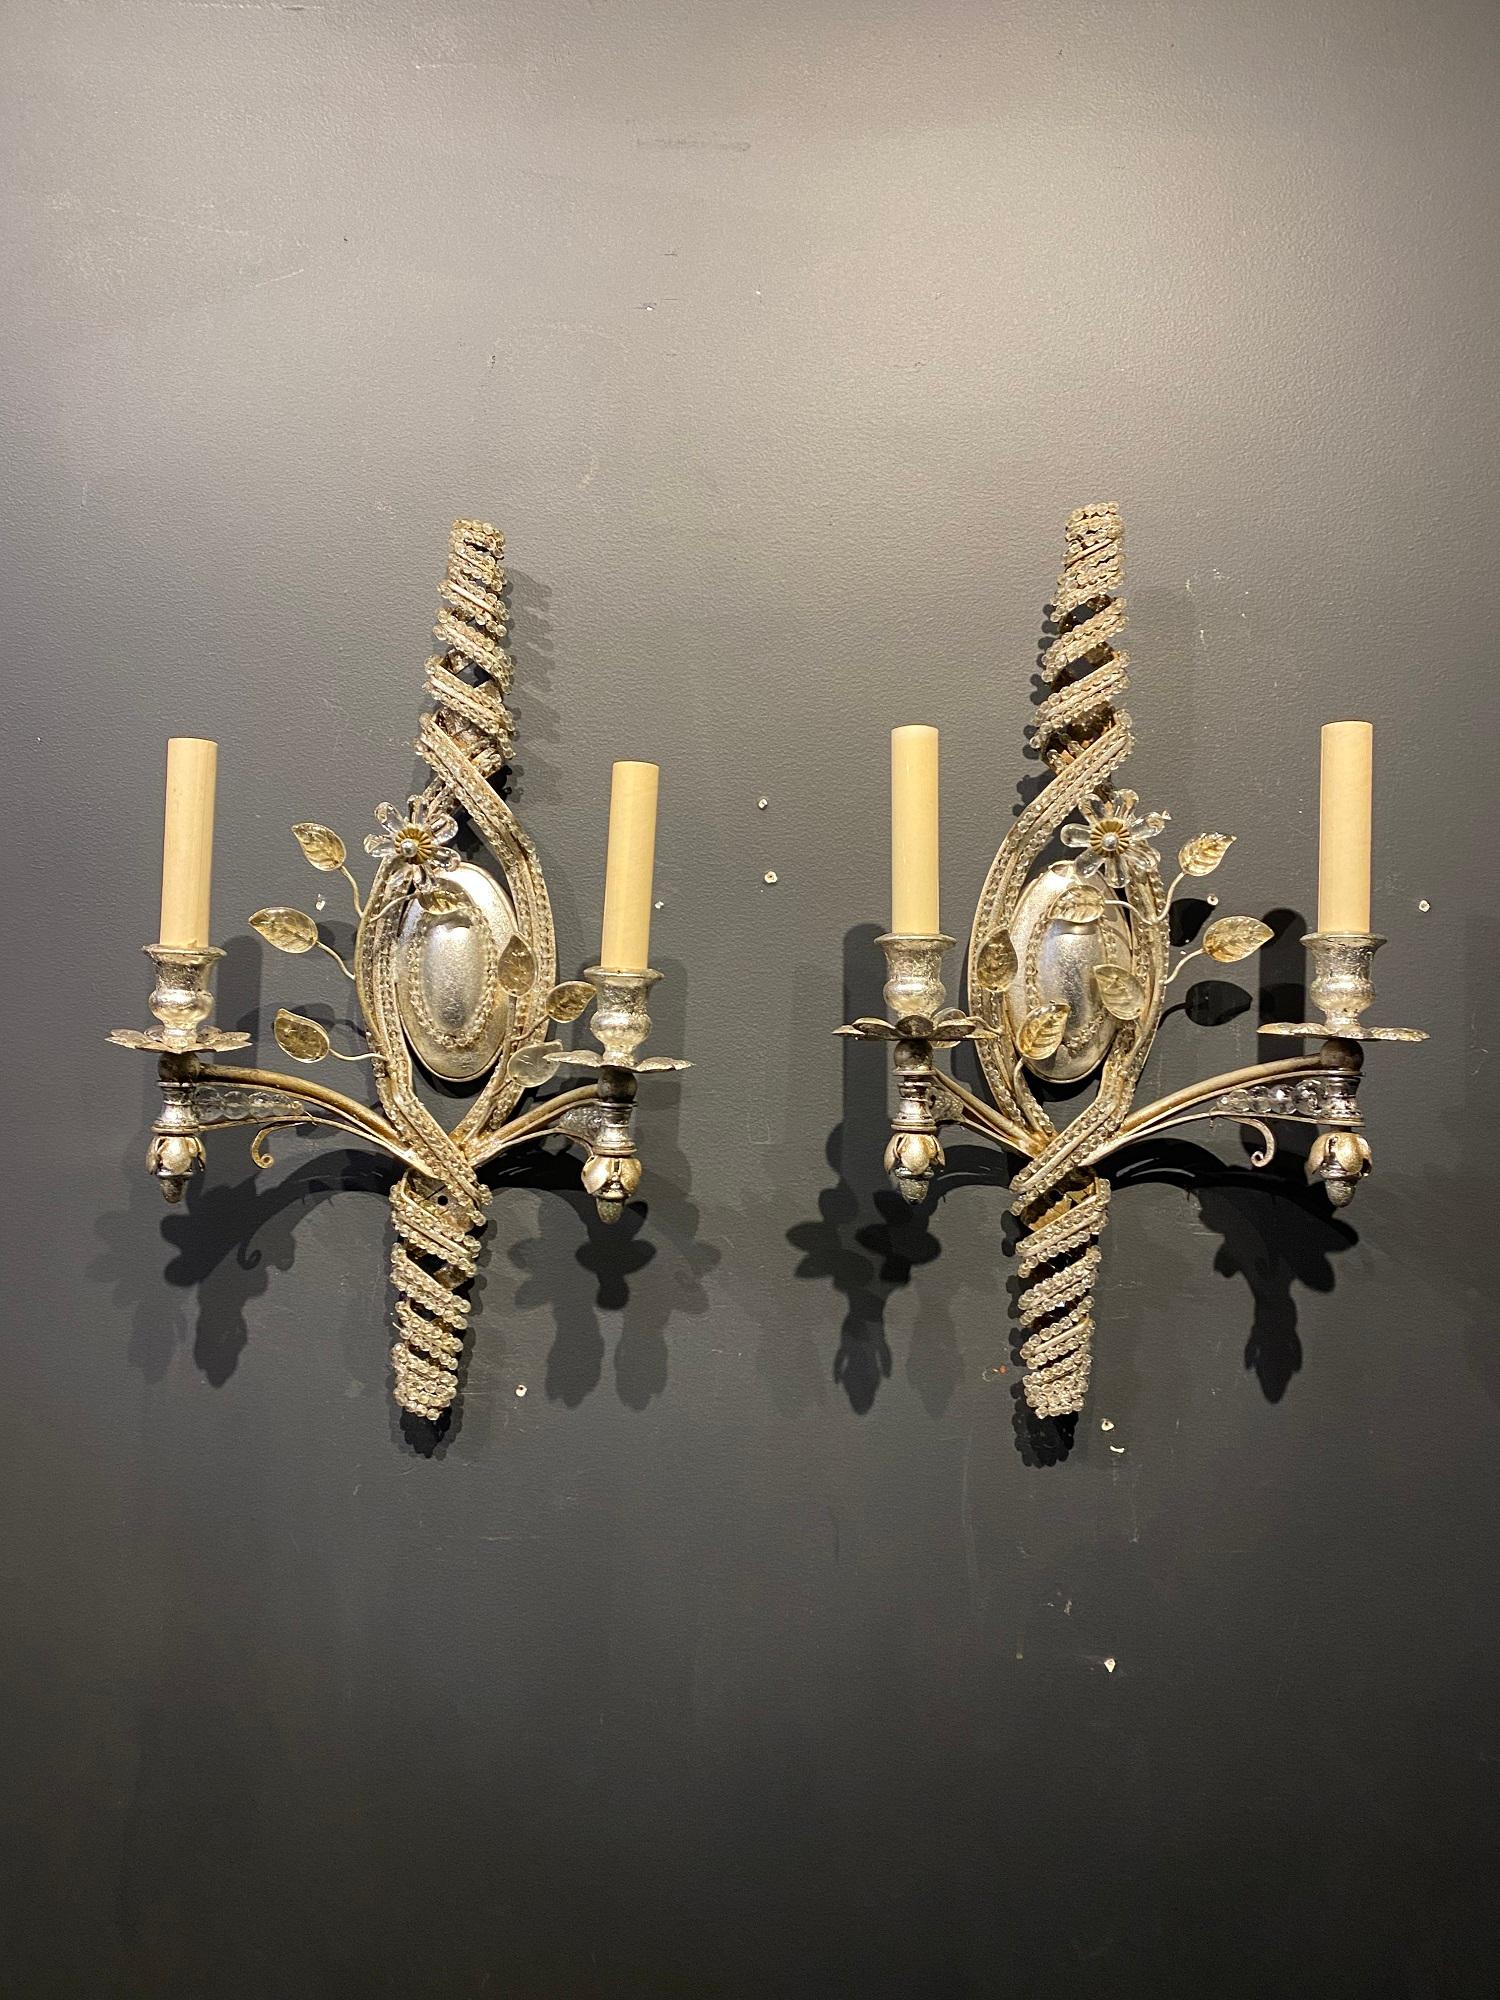 A pair of 1930’s French Bagues silver plated sconces with crystals on body and crystal leaves. Great condition, no imperfections original finish and patina.